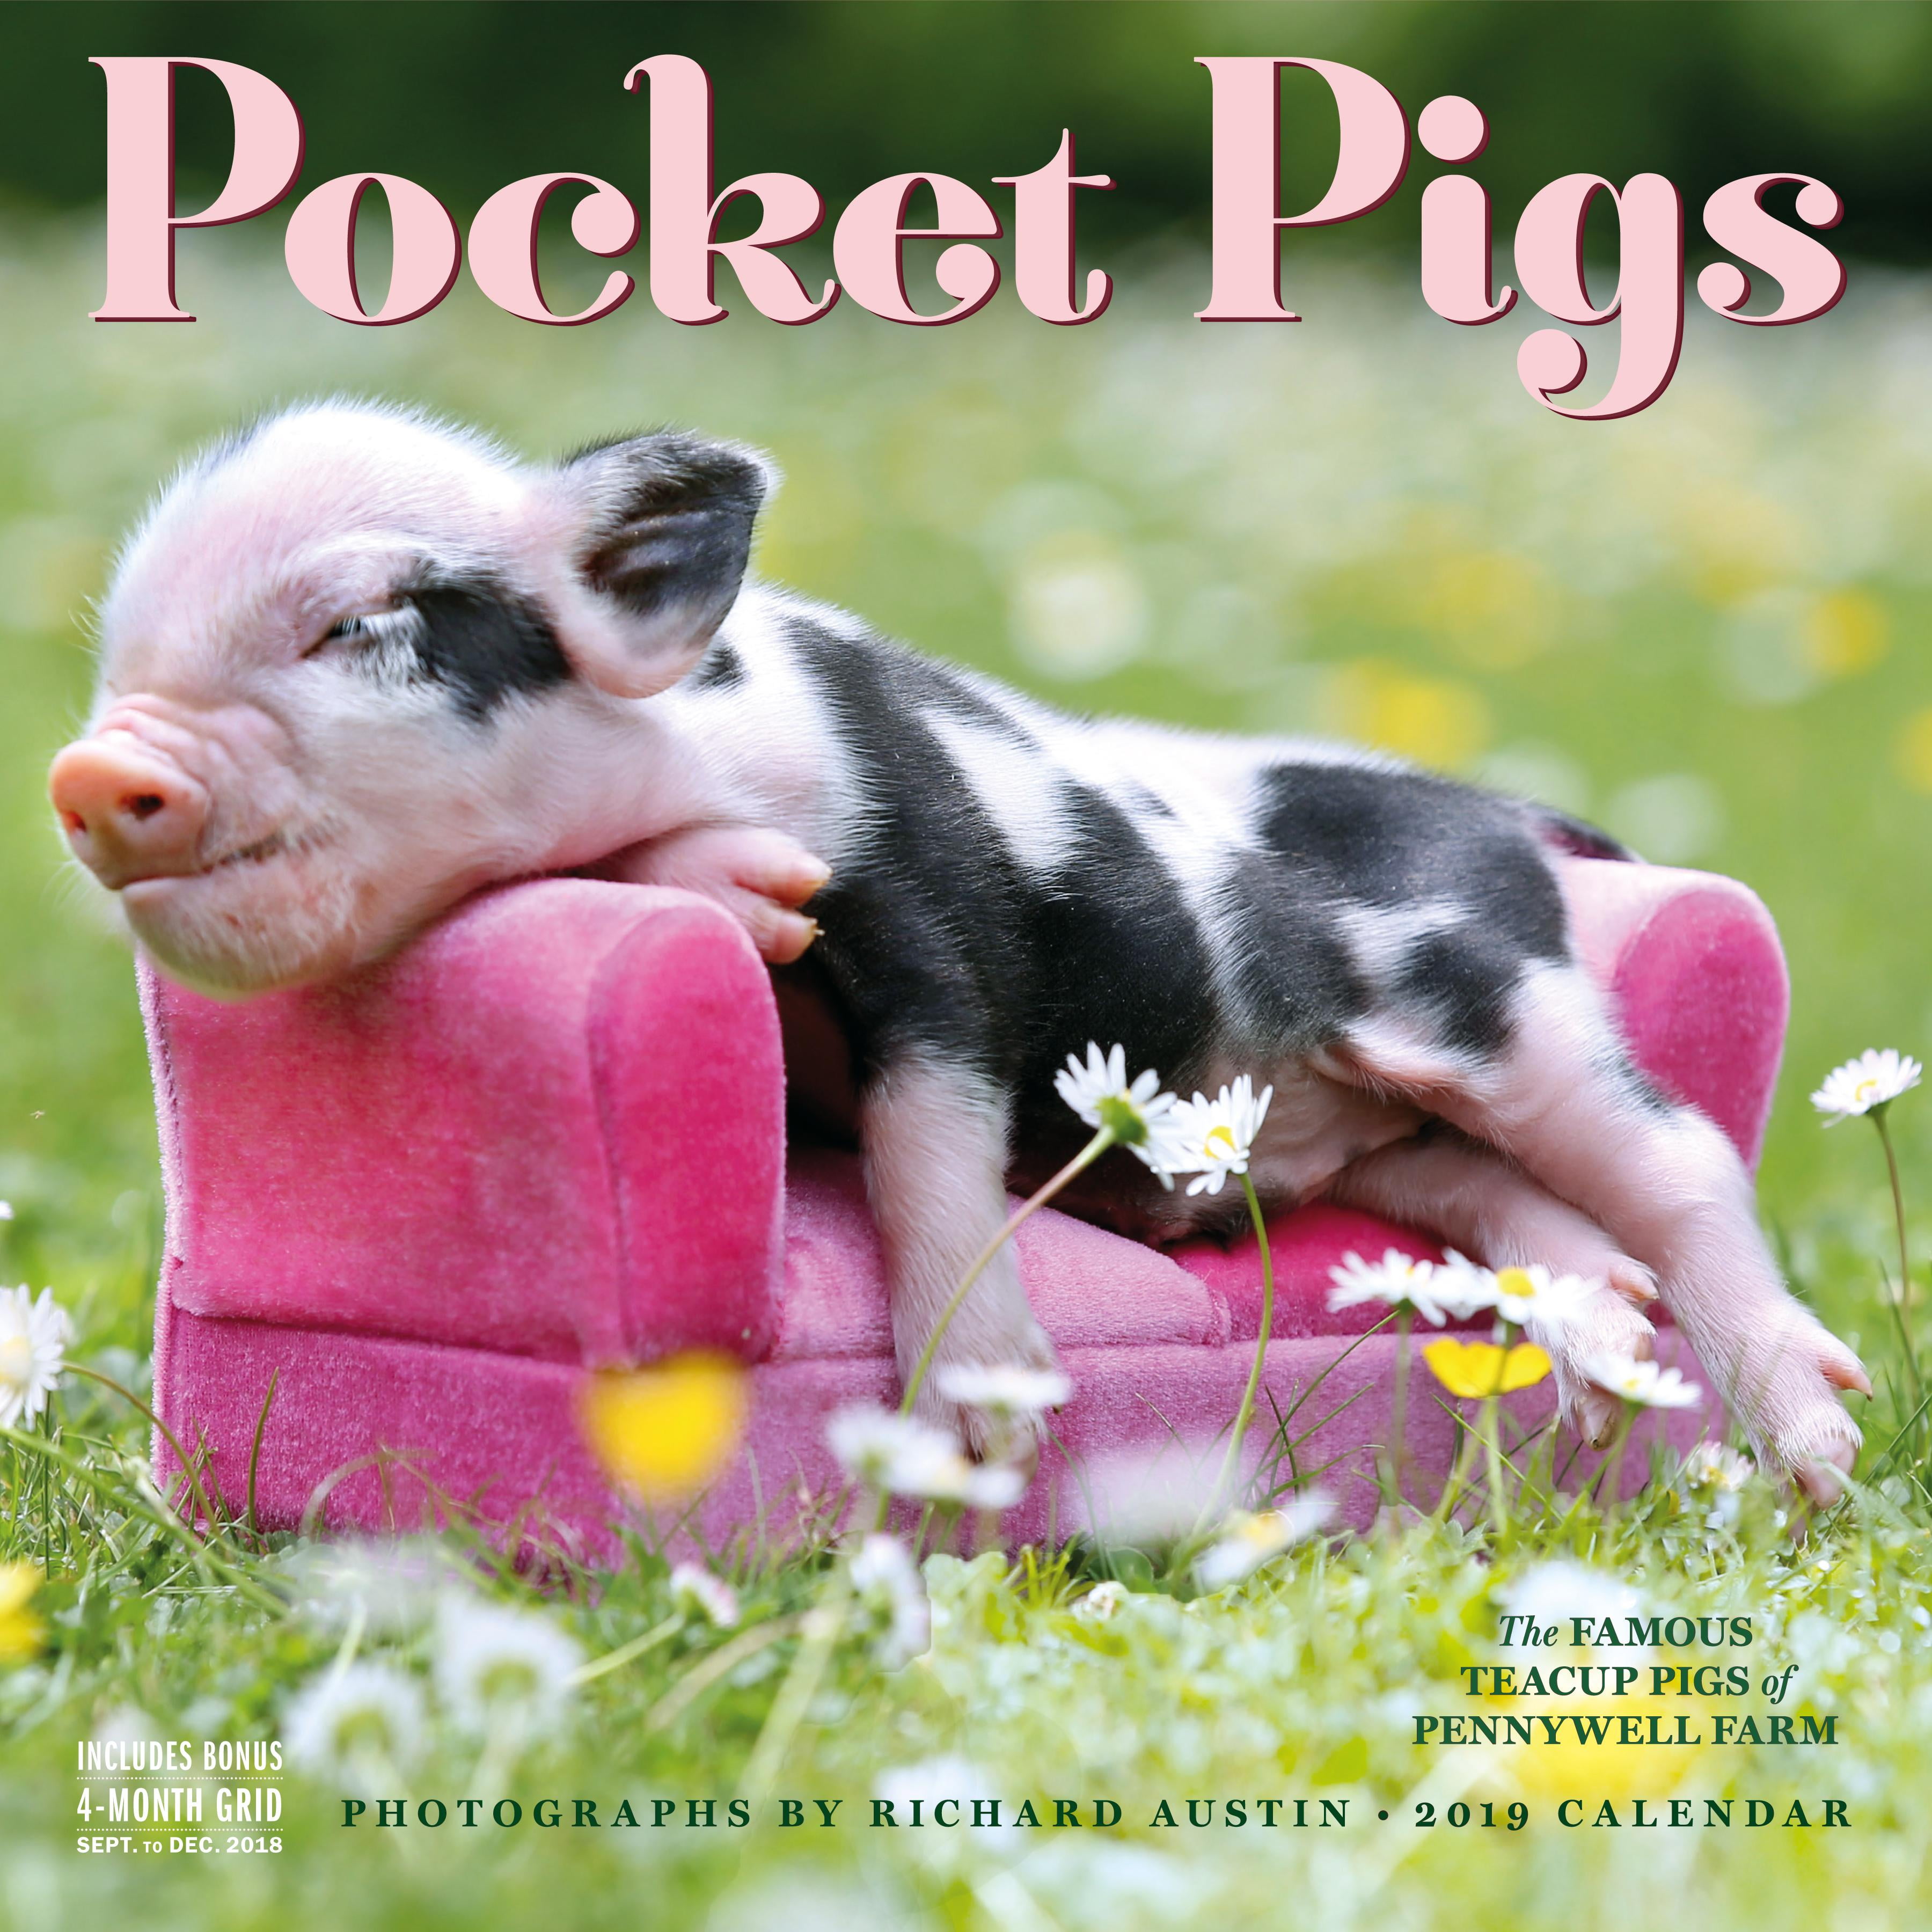 pocket-pigs-wall-calendar-2019-the-famous-teacup-pigs-of-pennywell